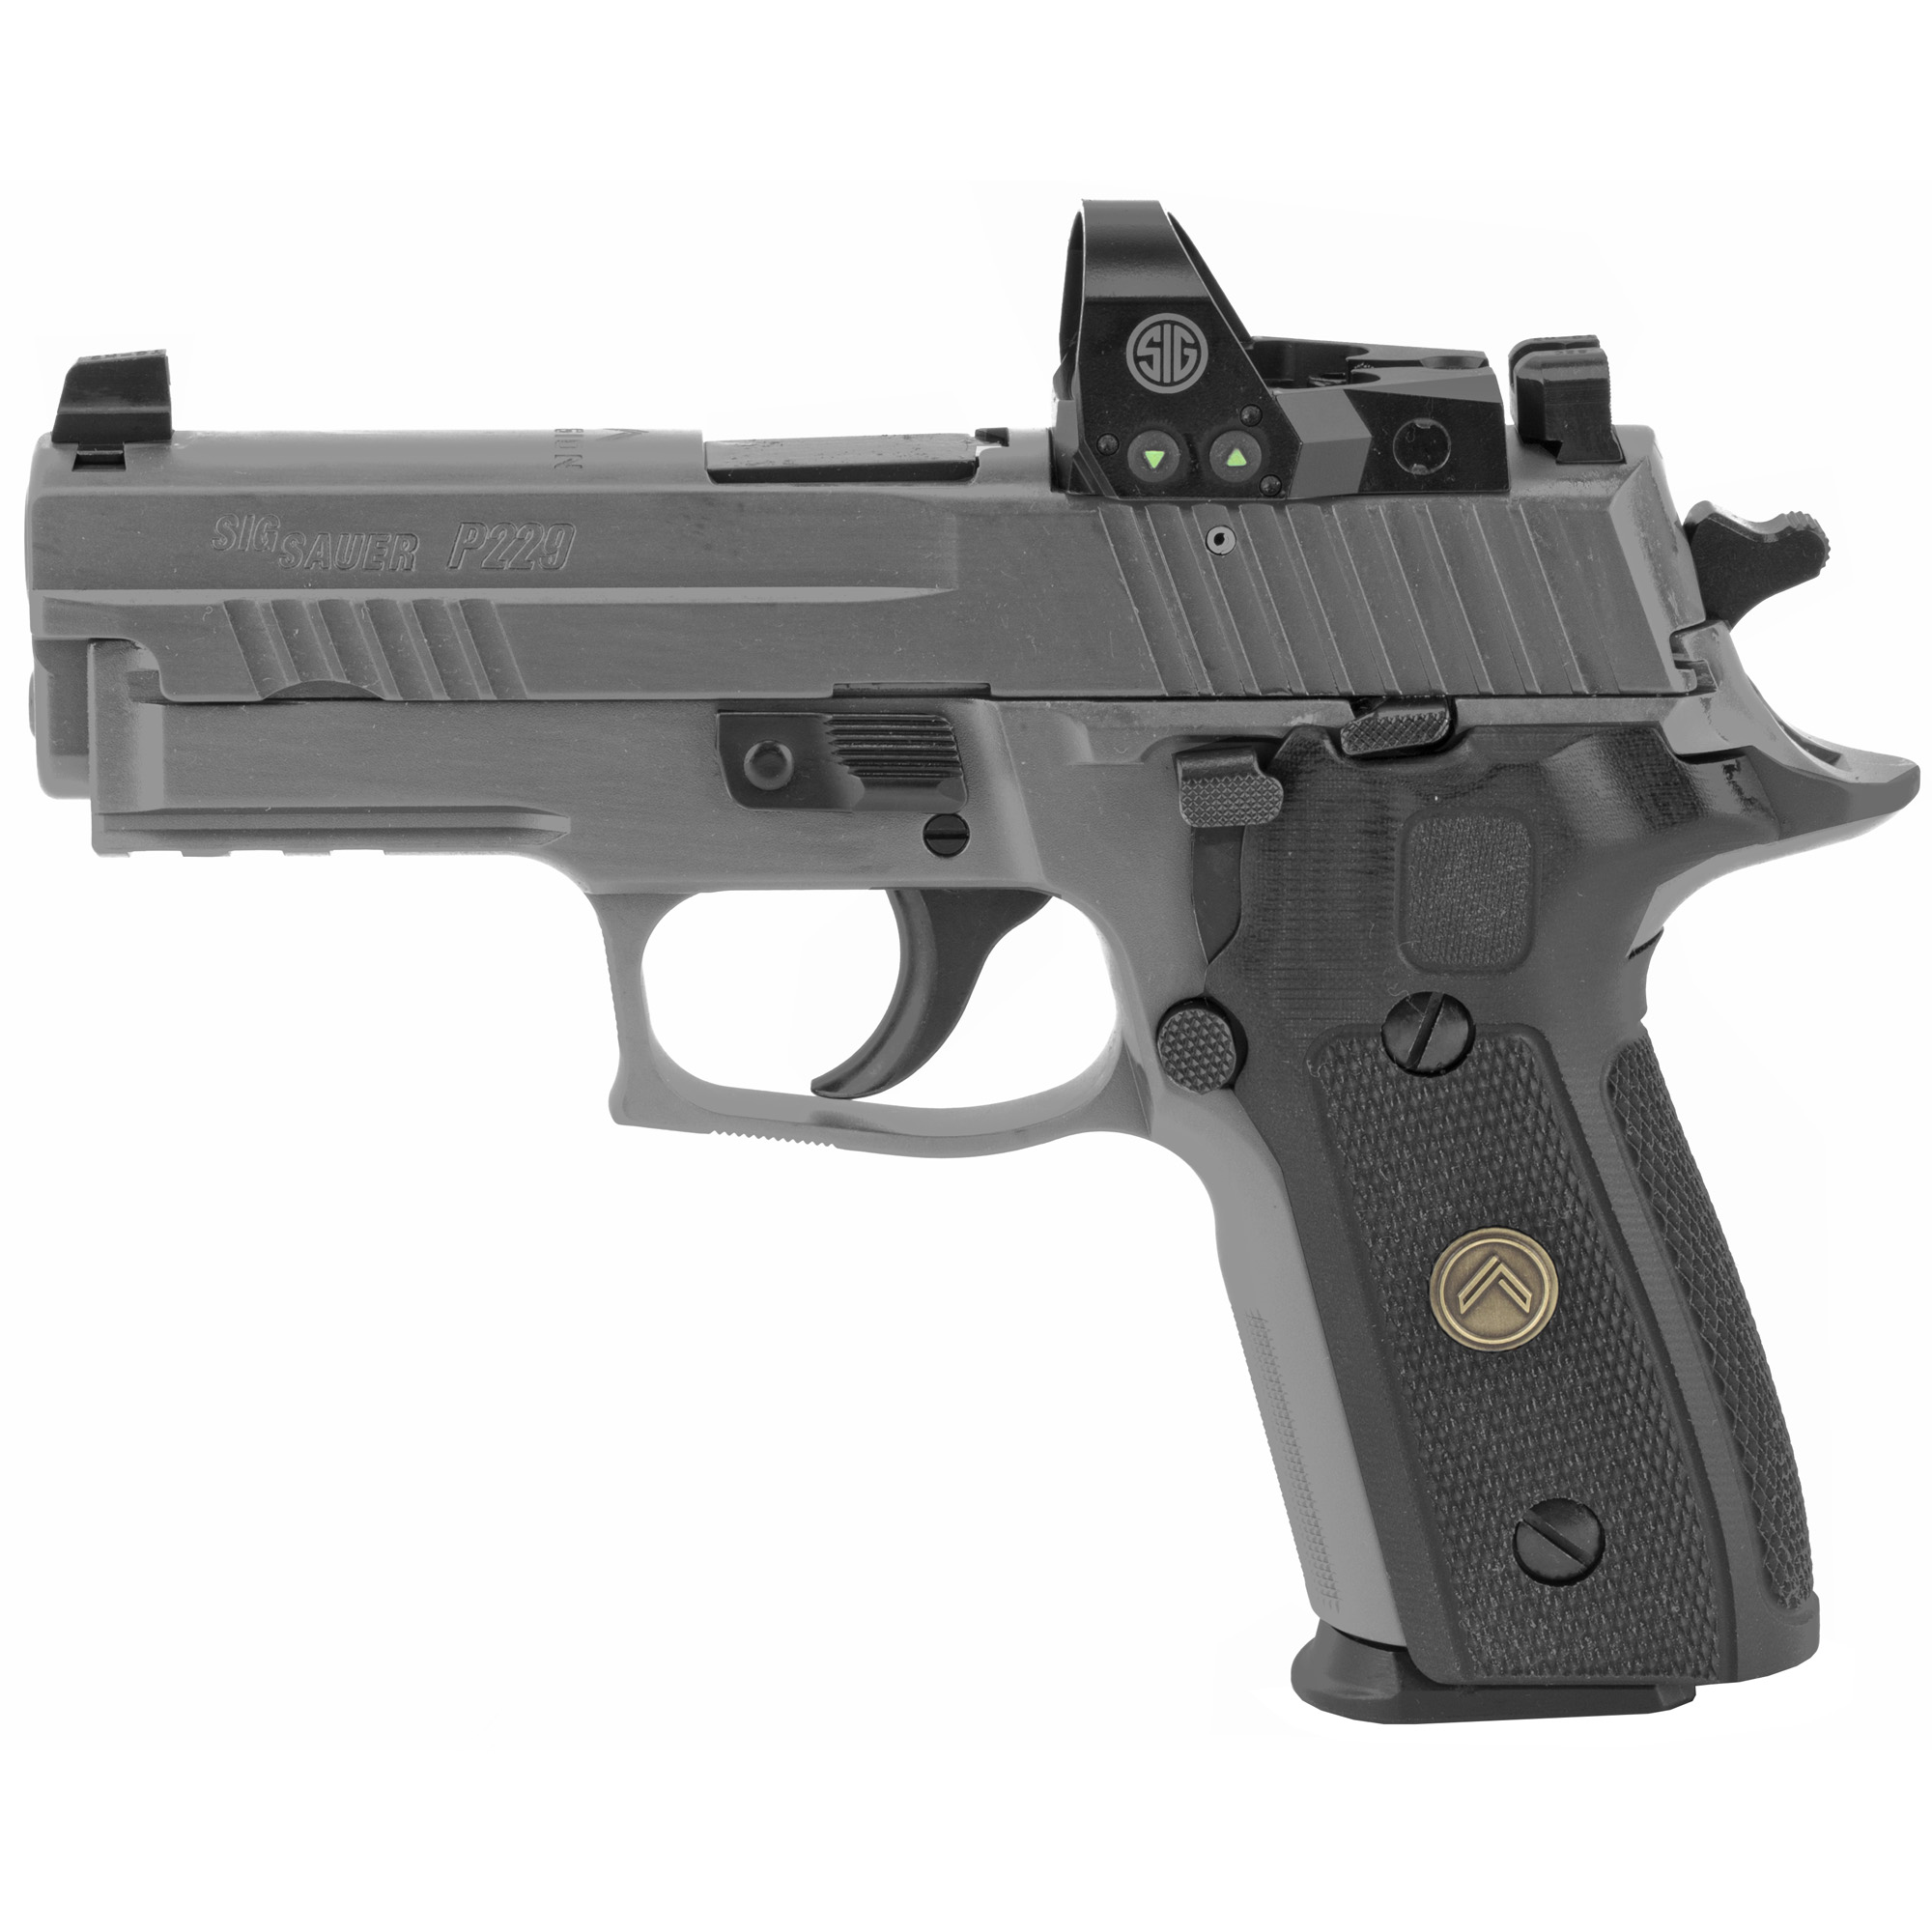 SIG SAUER P229 LGION 9MM 3.9 15RD GRY RXP